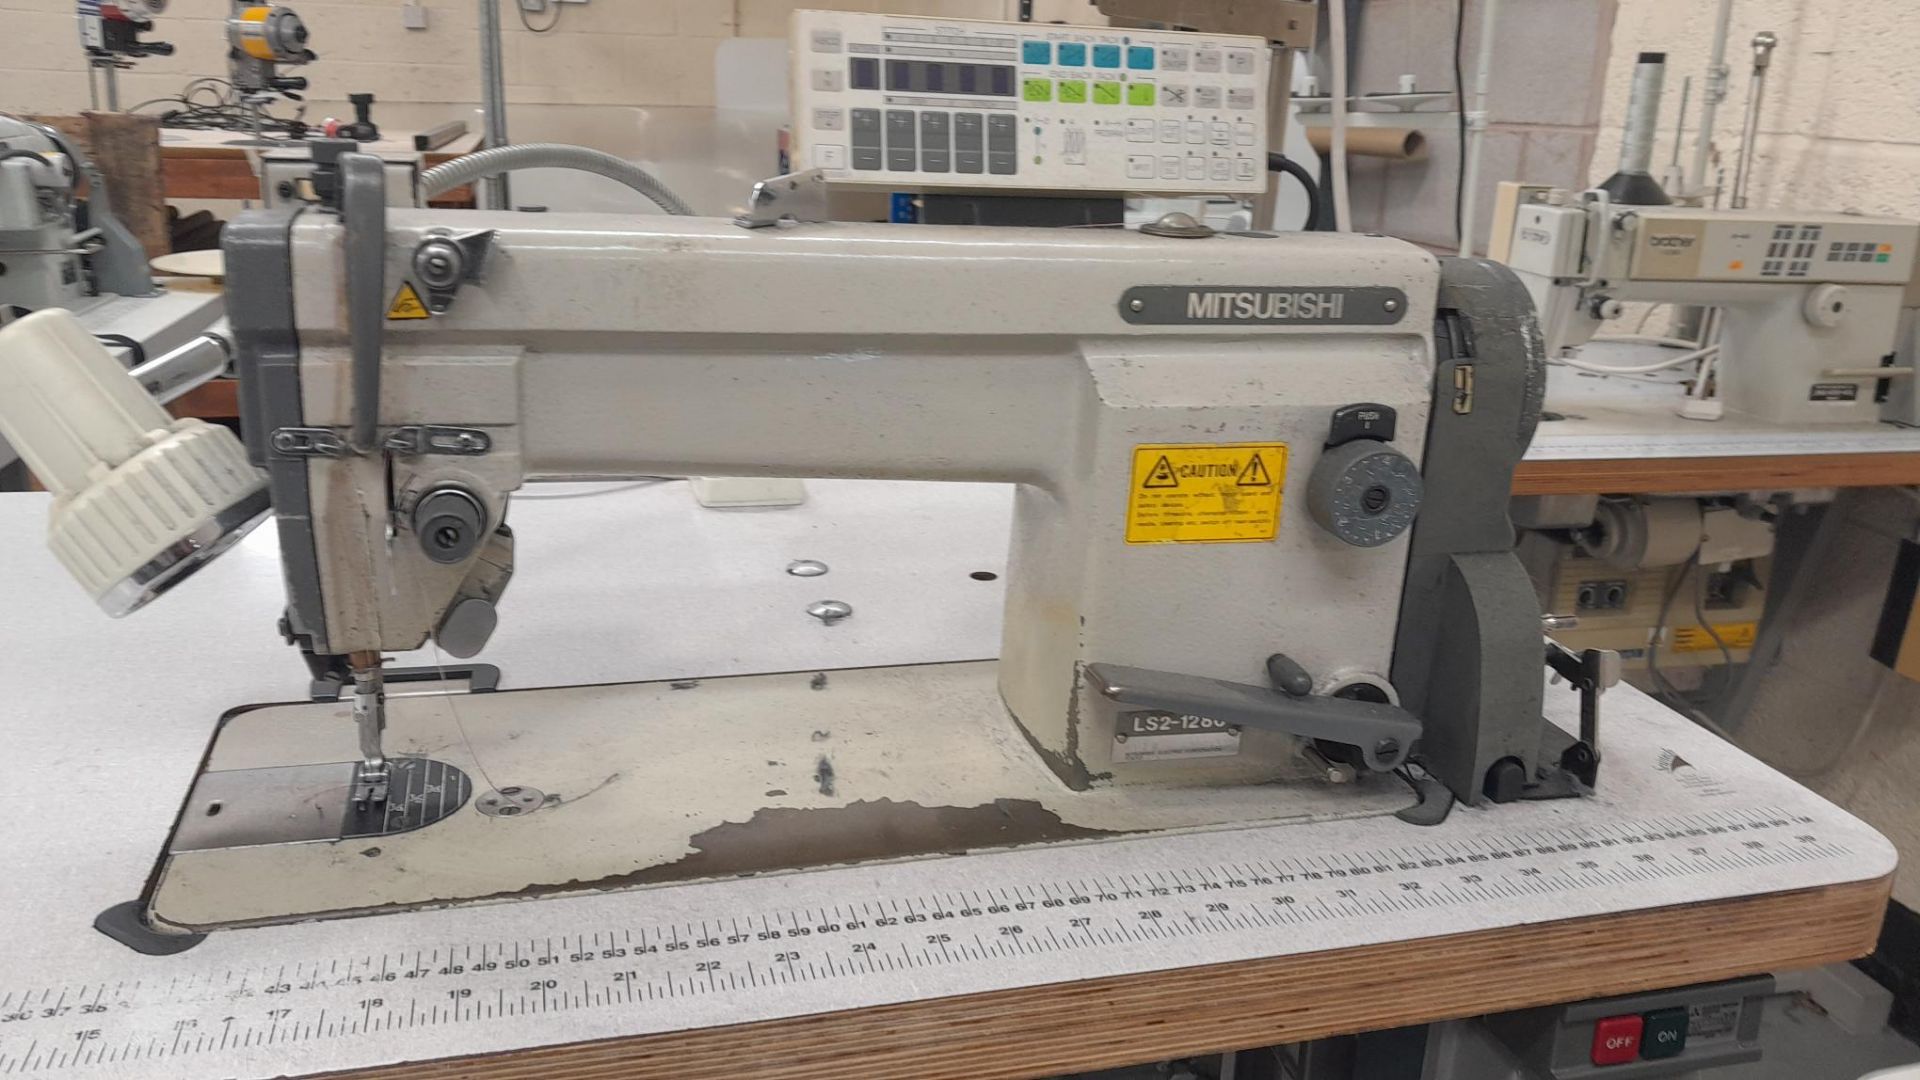 Mitsubishi LS2-1280 Flatbed Sewing Machine, Serial Number 830493, Please note that the machine is - Image 3 of 4